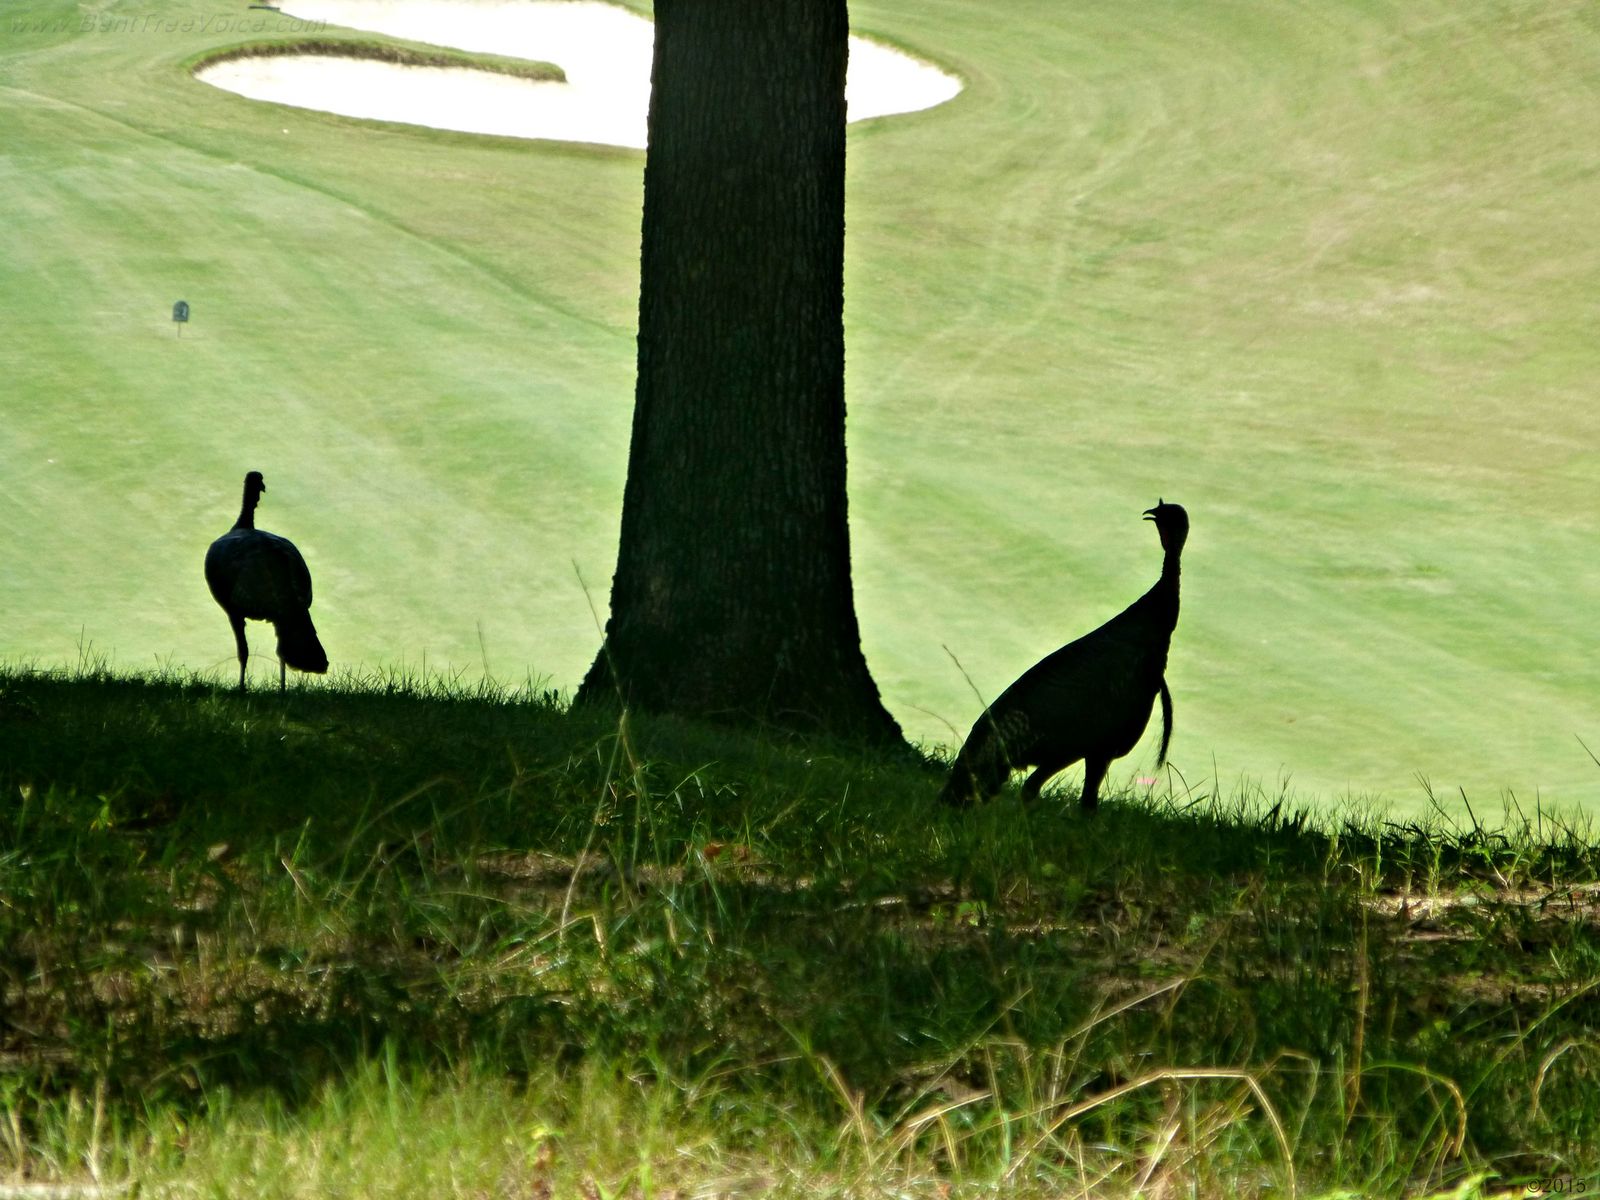 August 4, 2015 - turkeys in the rough on the Bent Tree Golf Course